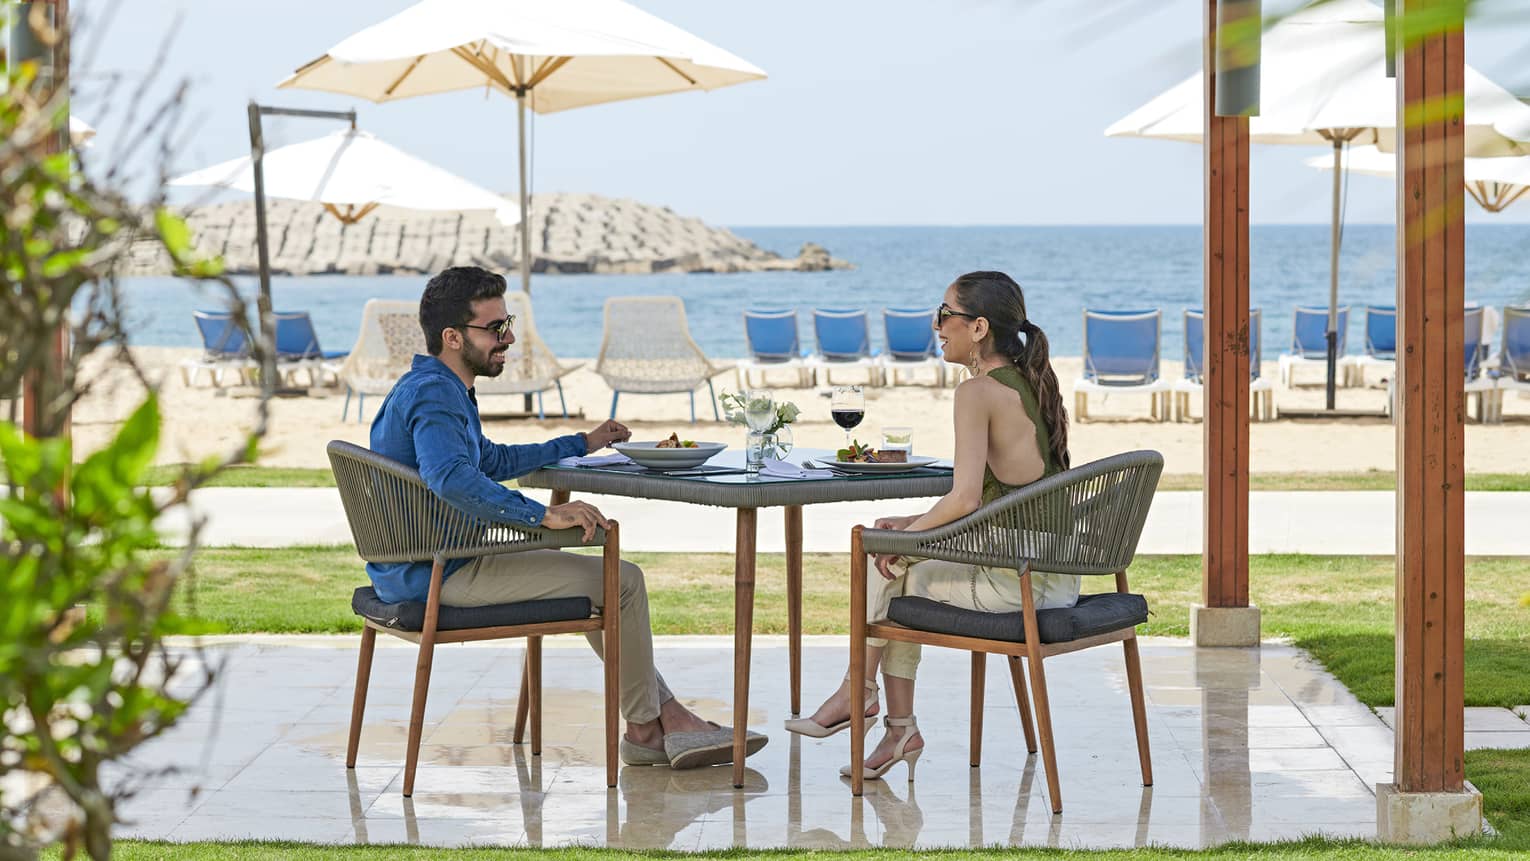 Smiling couple dines at patio table on private pergola near white sand beach